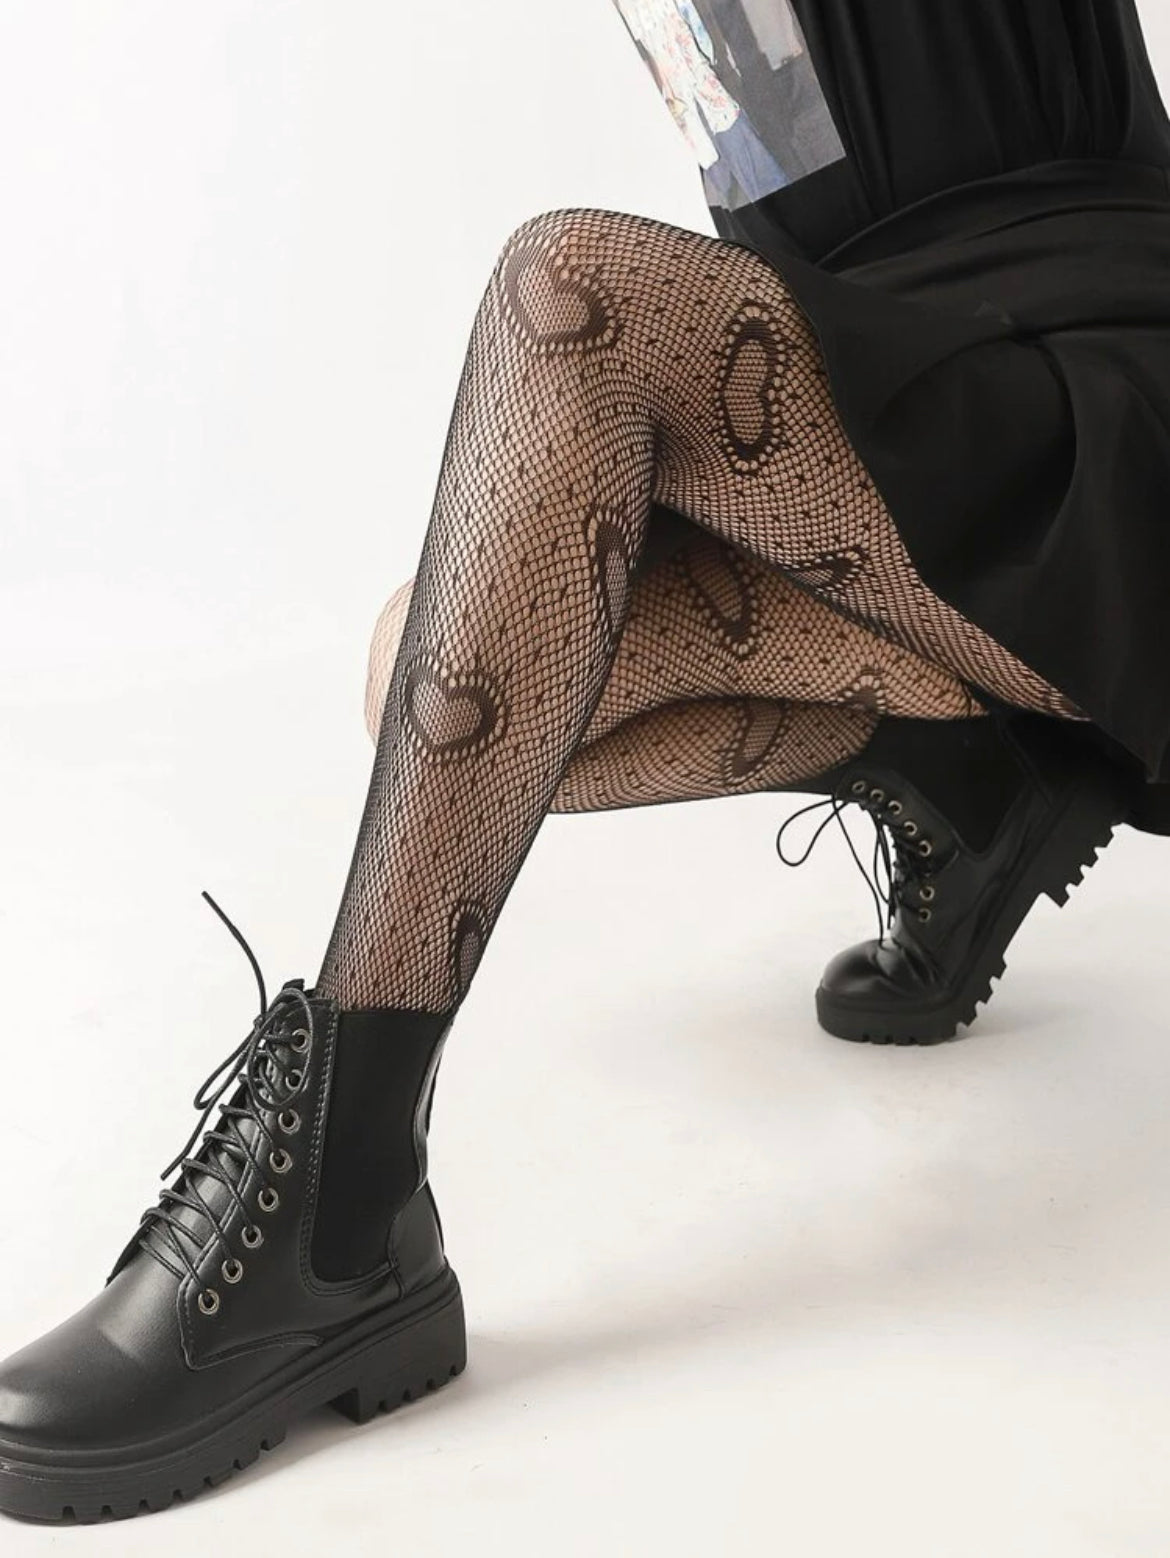 Buy Women's Letter G Fishnet Stockings Tights , Sexy Lace Pantyhose Leggings  for Womens with G Letters, velvet Nylon, Black+white, One Size at Amazon.in